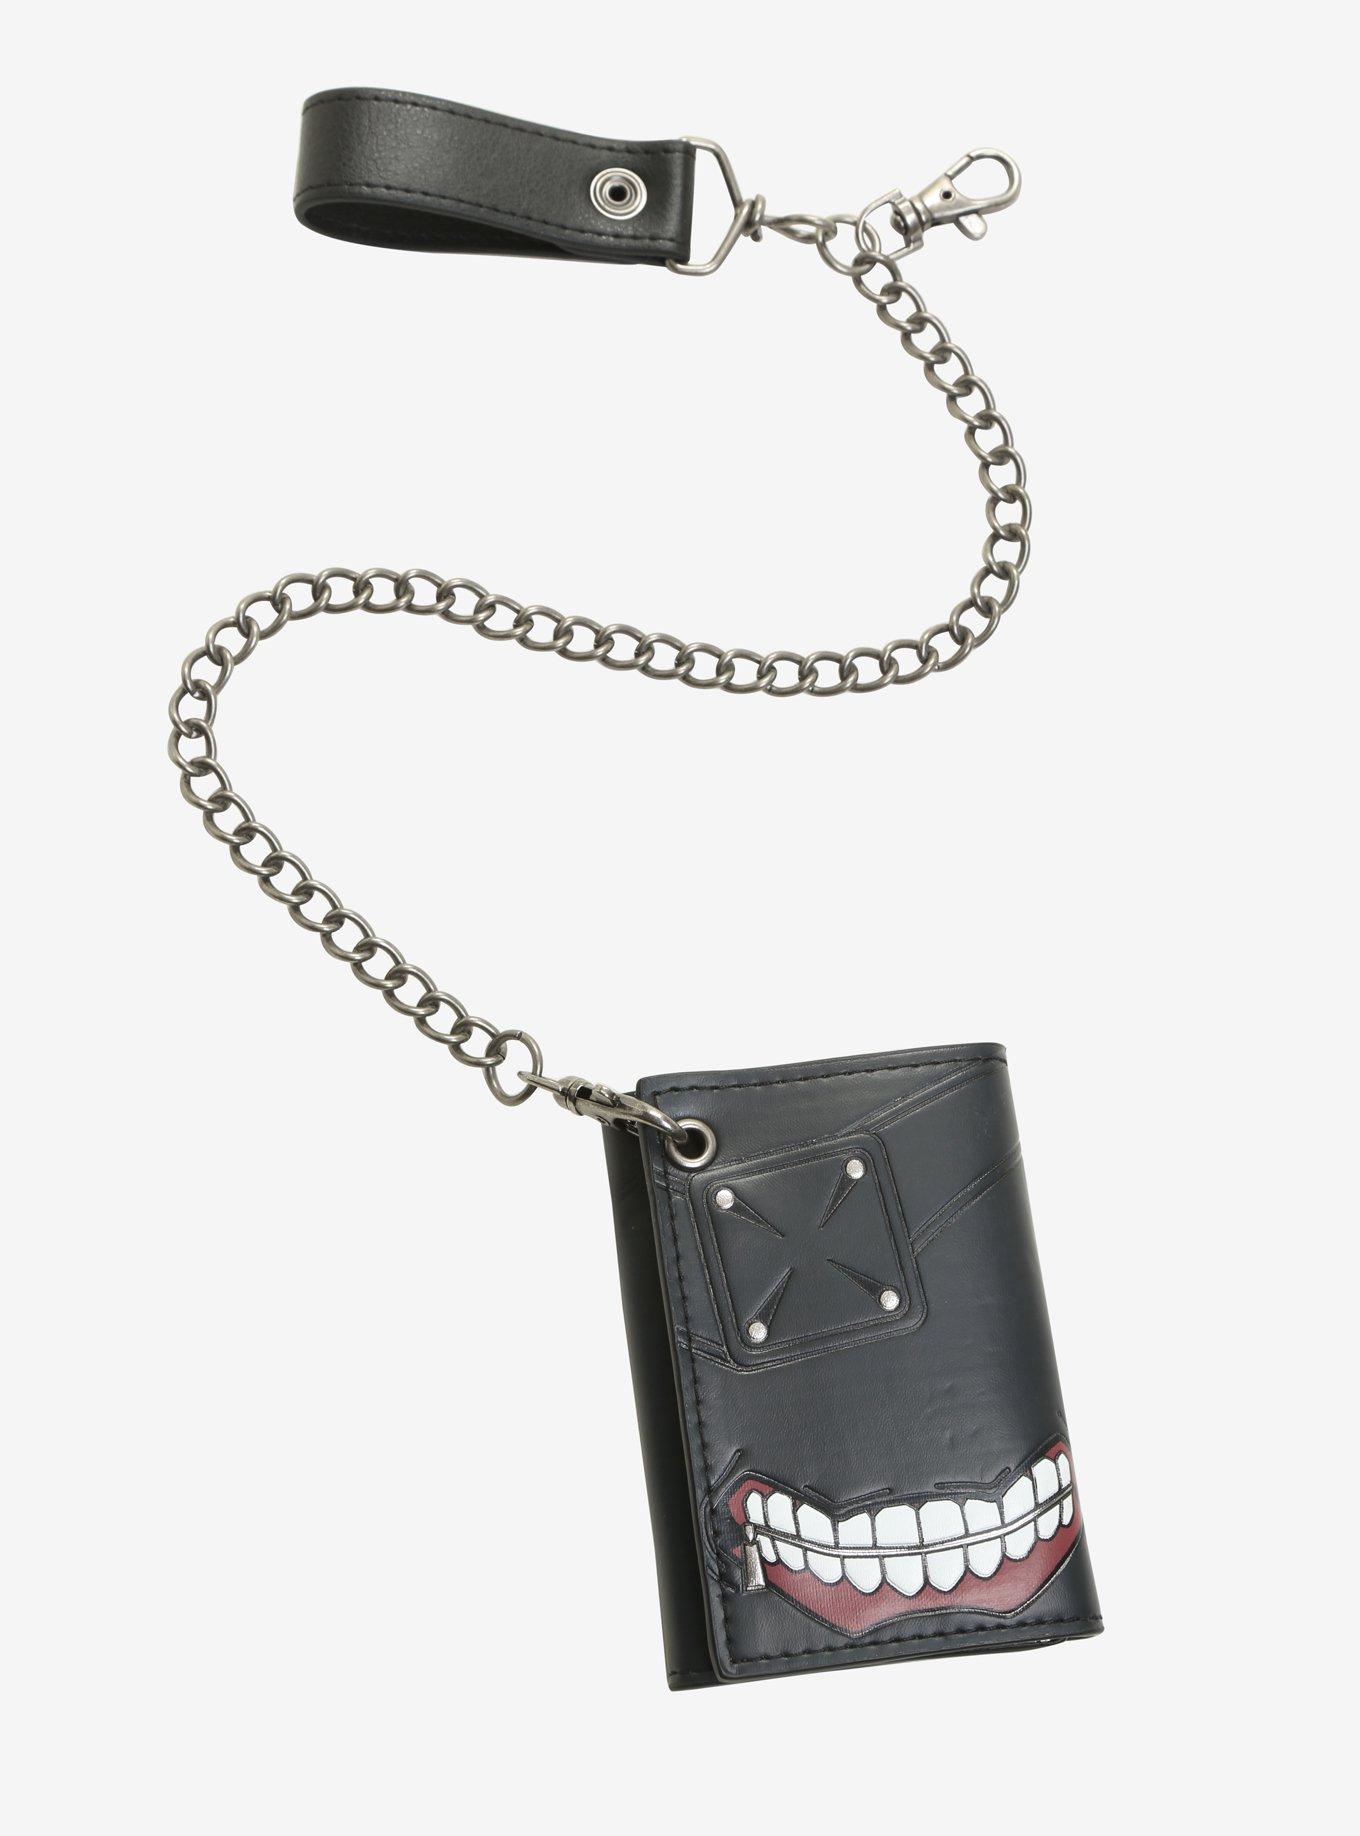 Minimalist Leather Chain Wallet - Fallout Yes